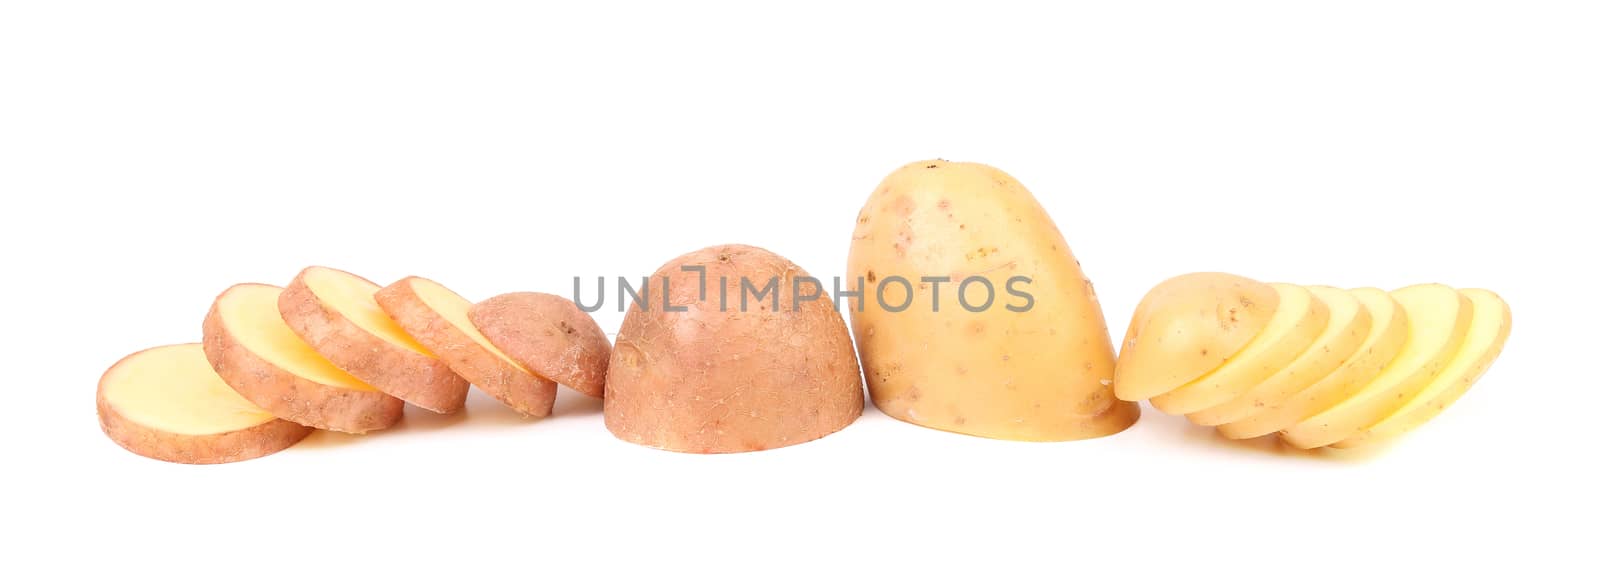 Different potatoes and split tuber. by indigolotos